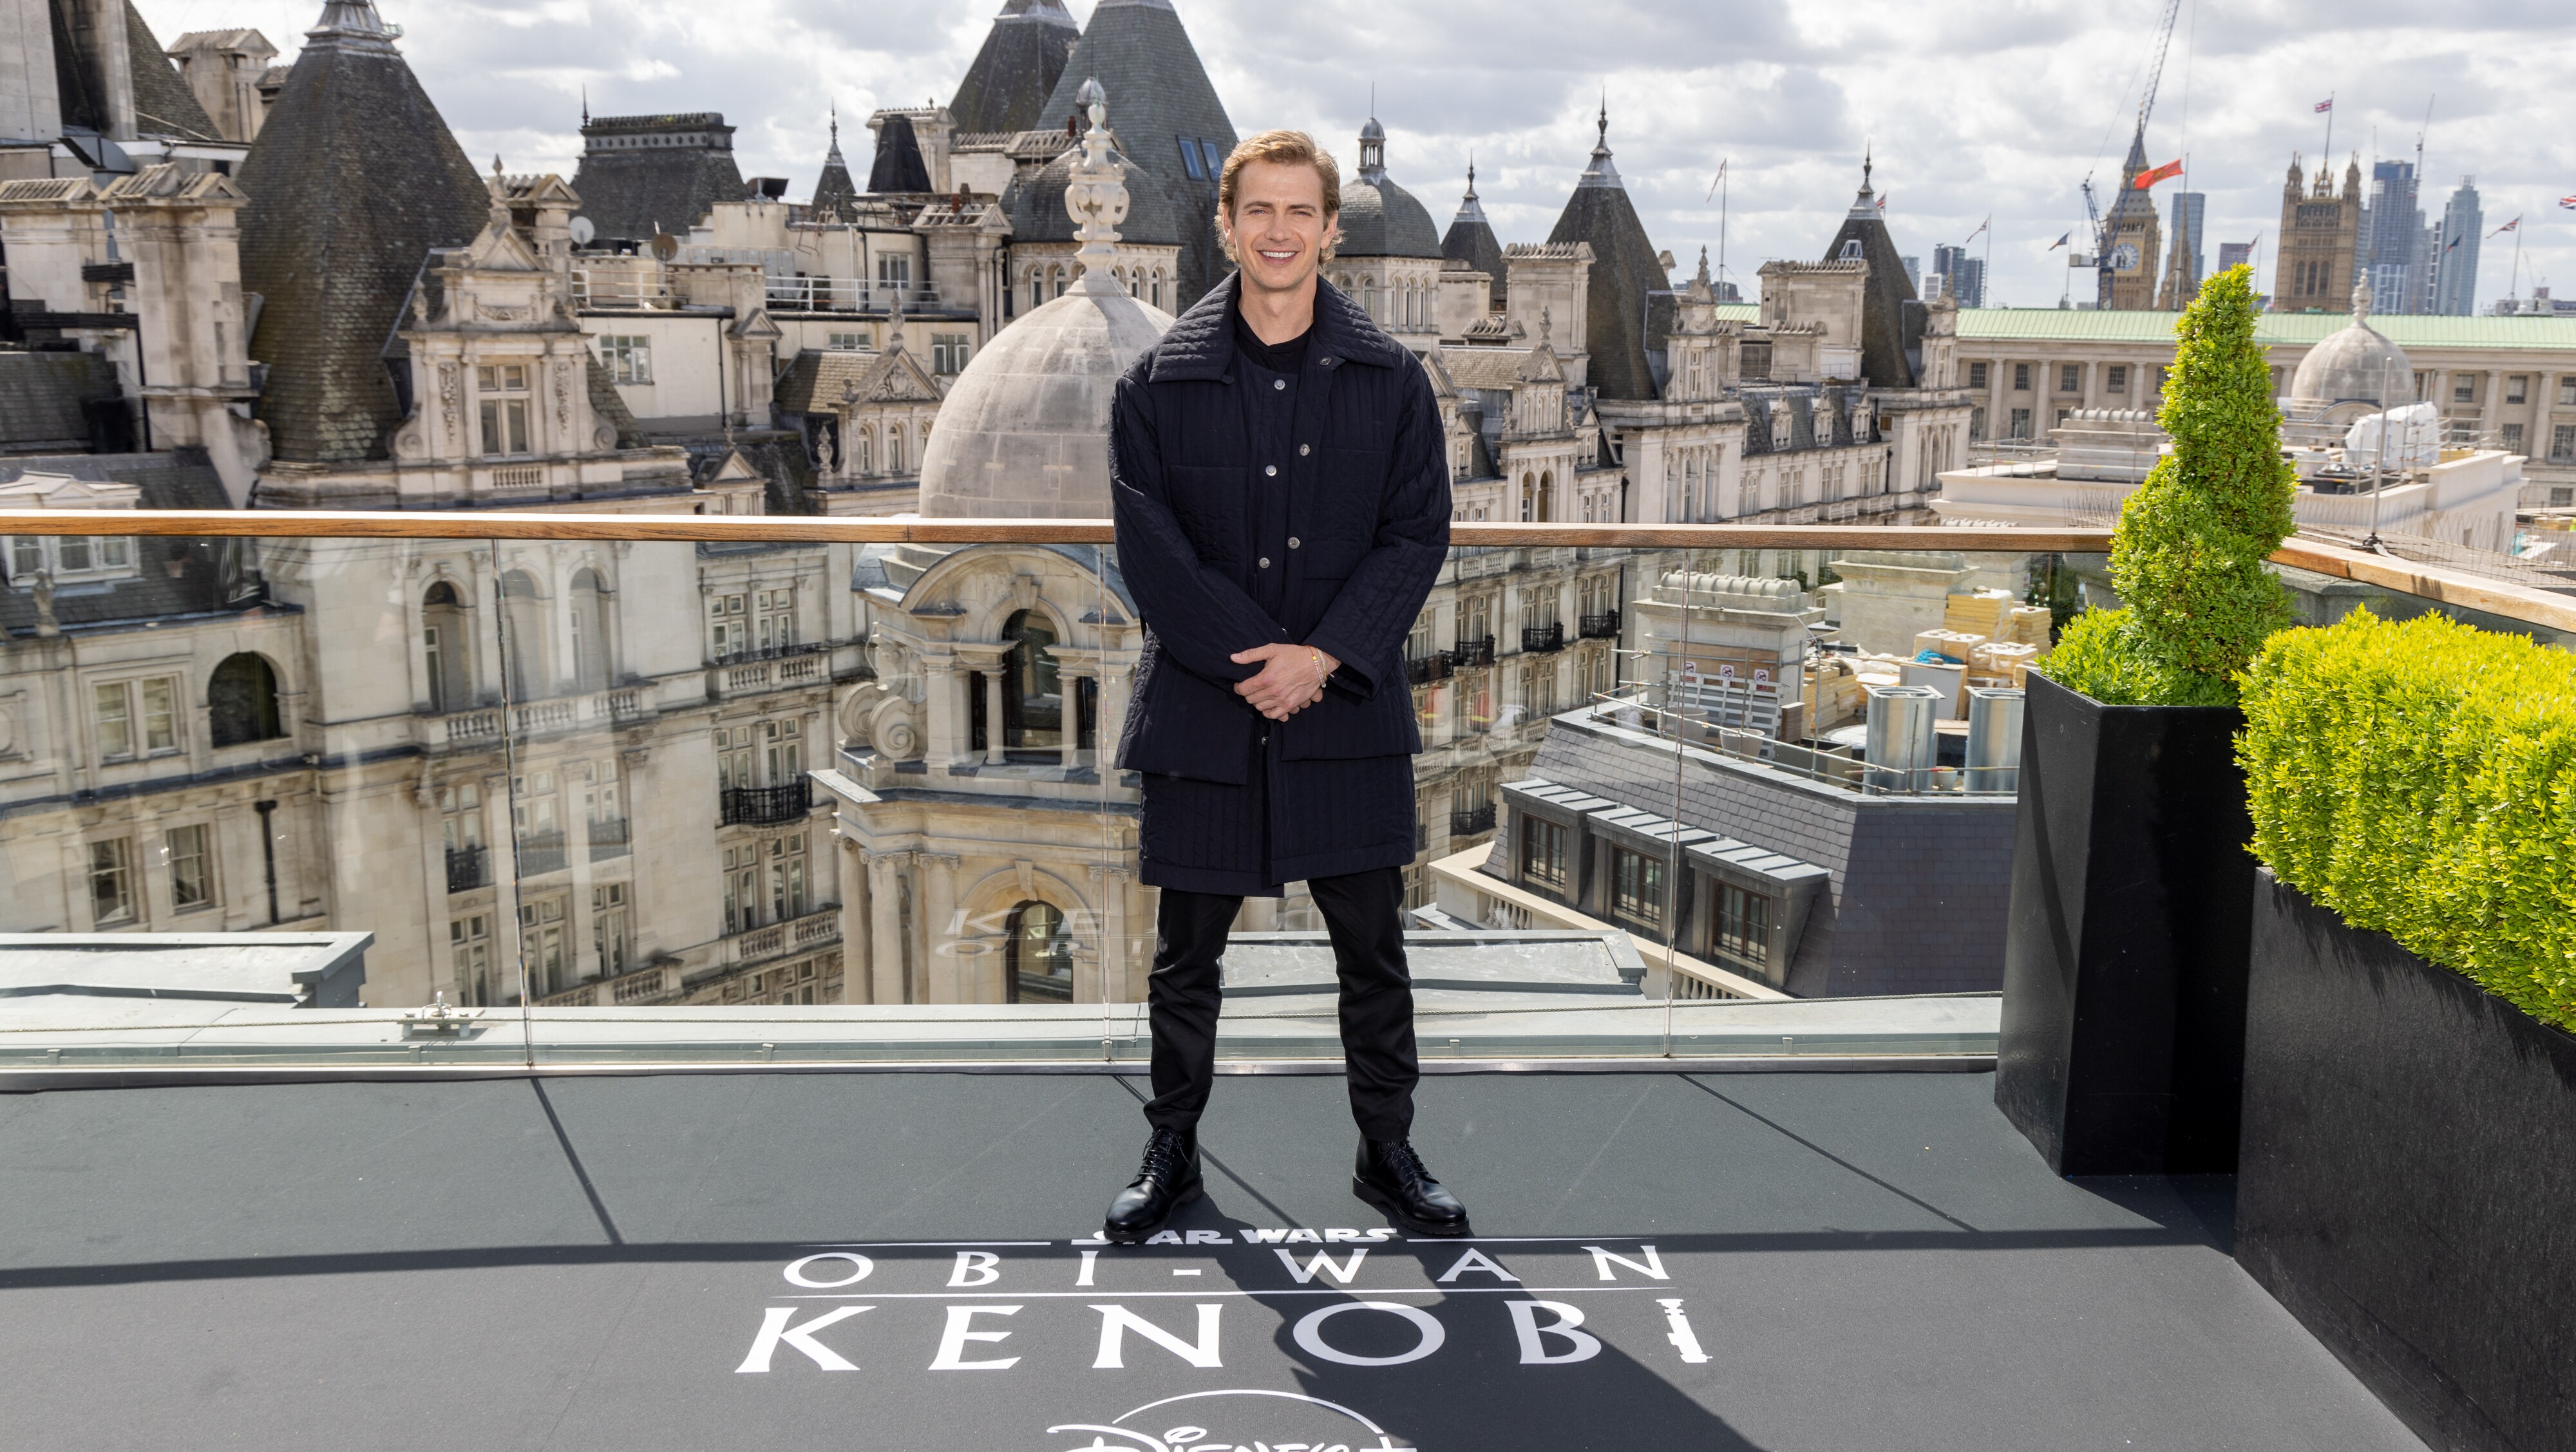 LONDON, ENGLAND - MAY 12:  Hayden Christensen attends the photocall for the new Disney+ limited series "Obi Wan Kenobi" at the Corinthia Hotel on May 12, 2022 in London, England. Obi-Wan Kenobi will be exclusively available on Disney+ from May 27. (Photo by StillMoving.net for Disney)